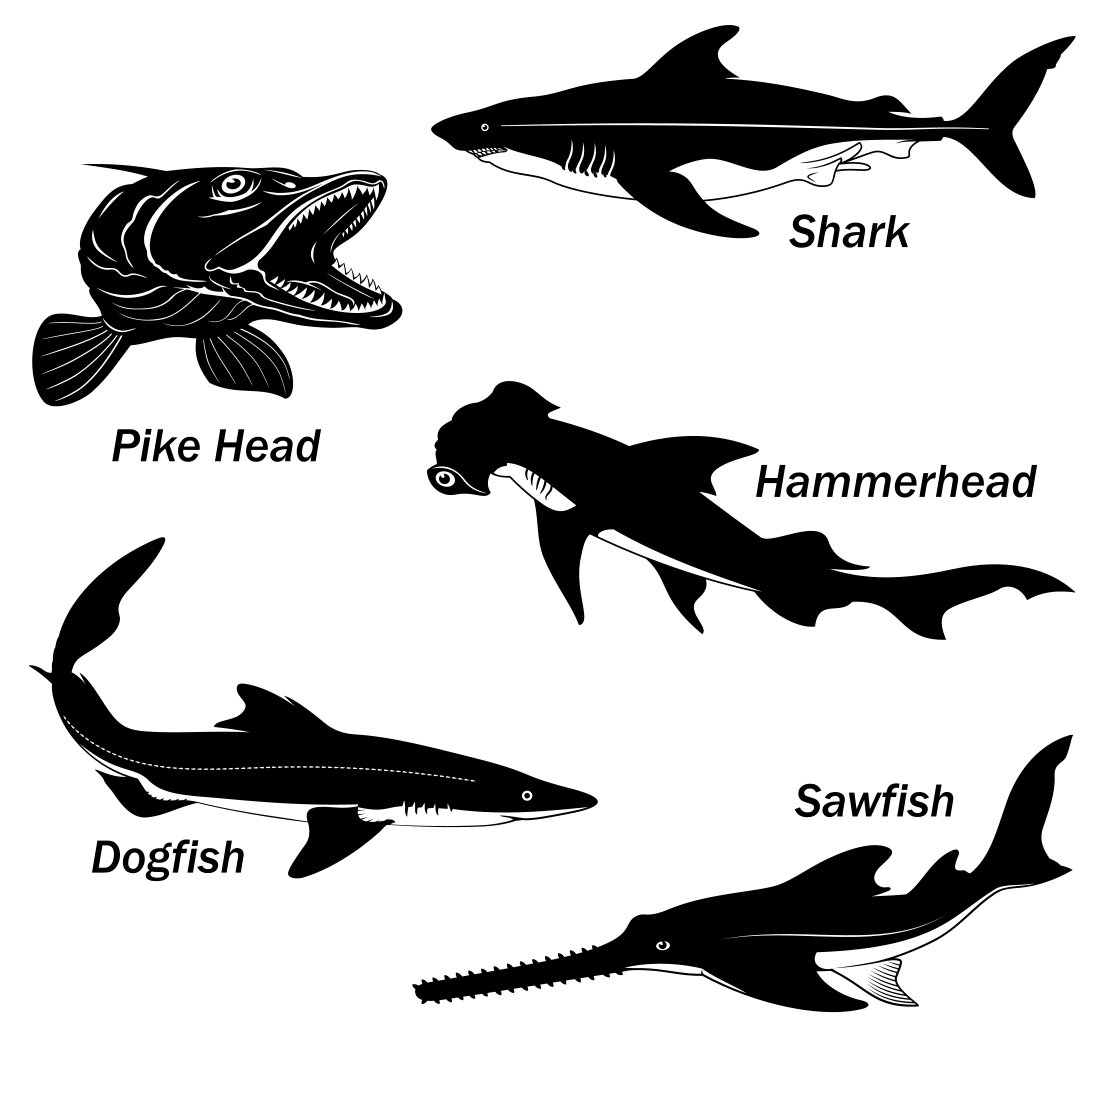 Four different types of sharks are shown in black and white.